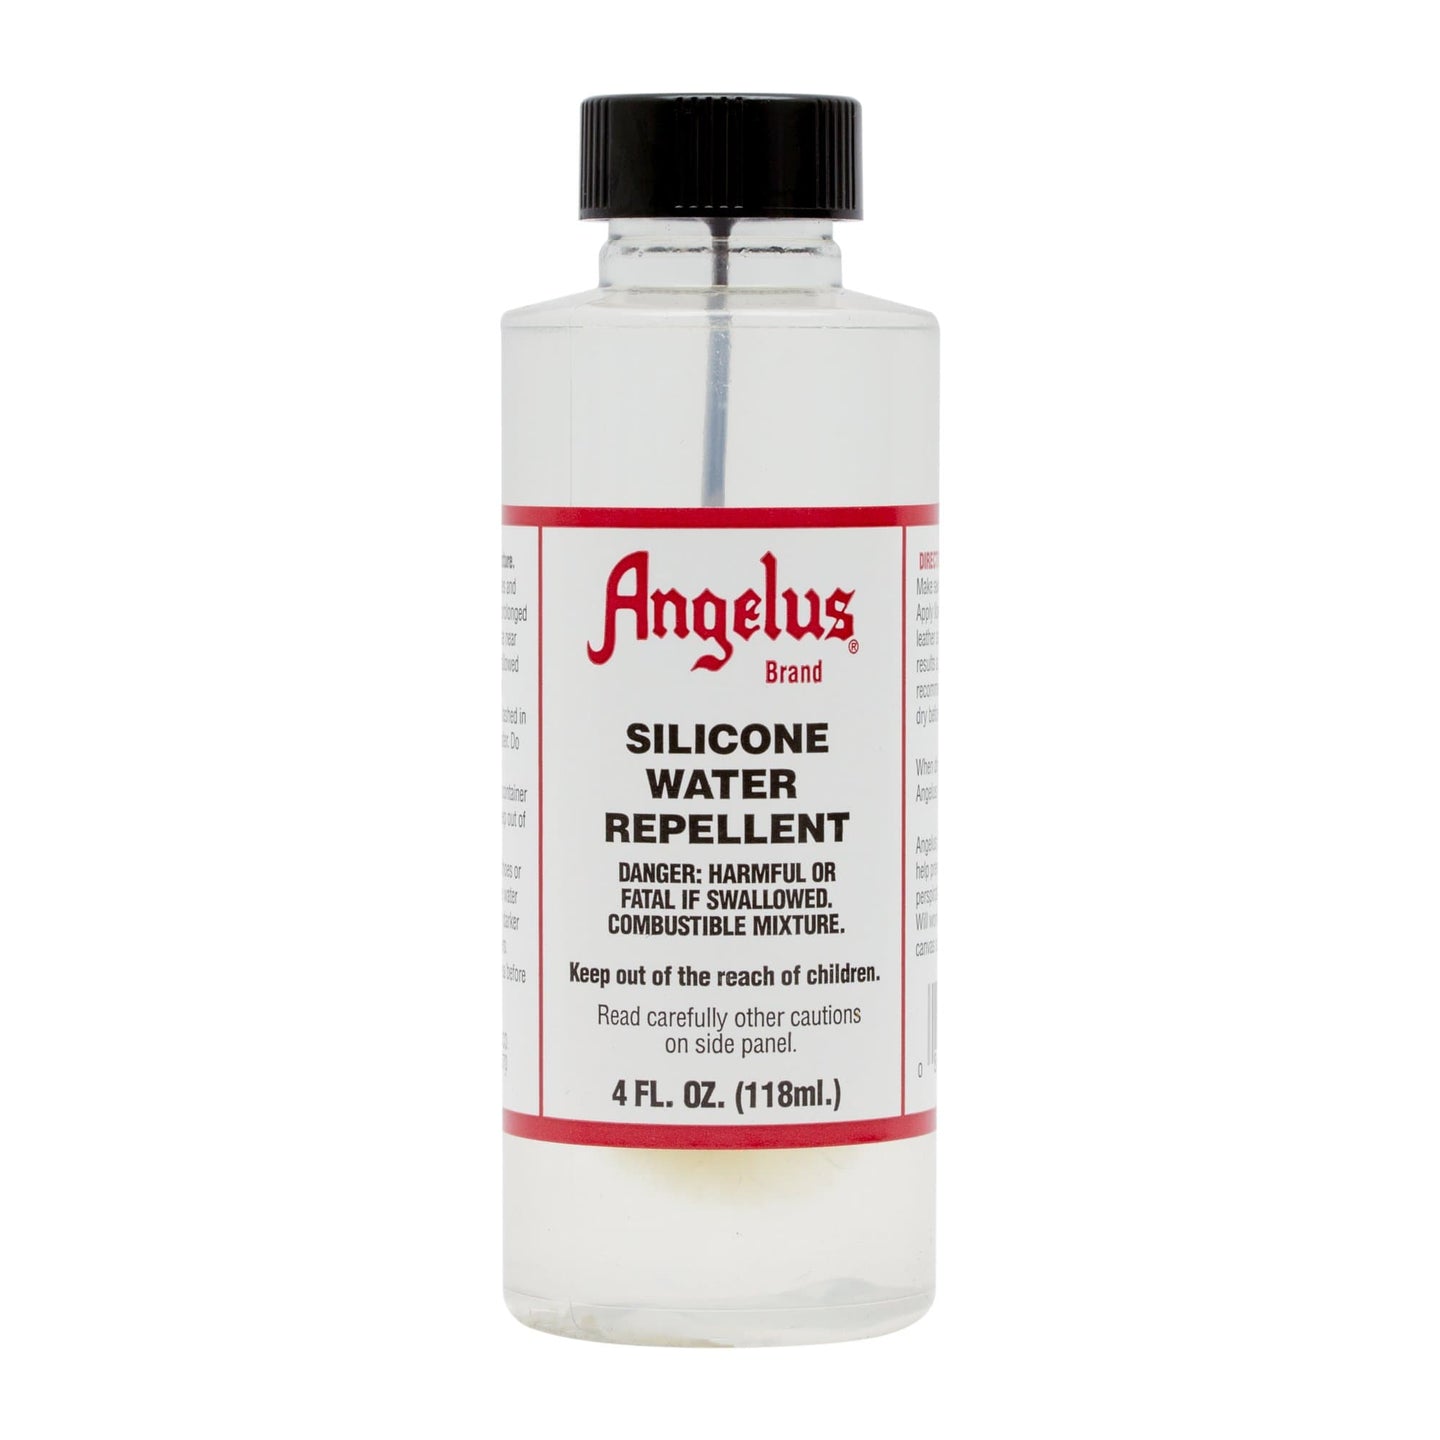 ANGELUS SILICONE WATER REPELLENT